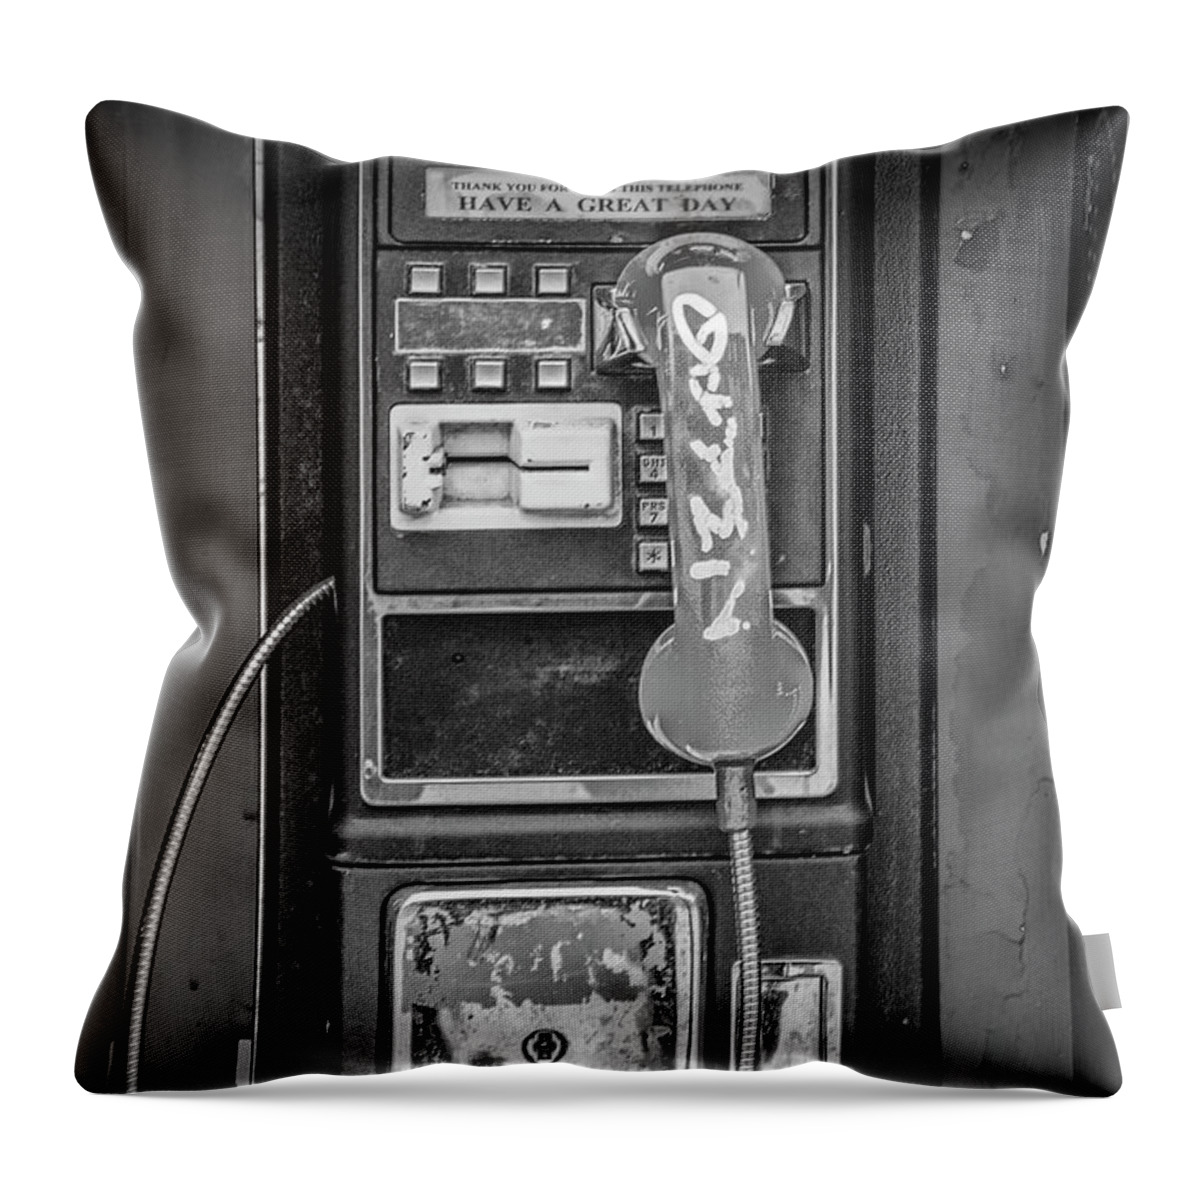 Telephone Throw Pillow featuring the photograph Old Vintage Coin Operated Phone Booth by Randall Nyhof